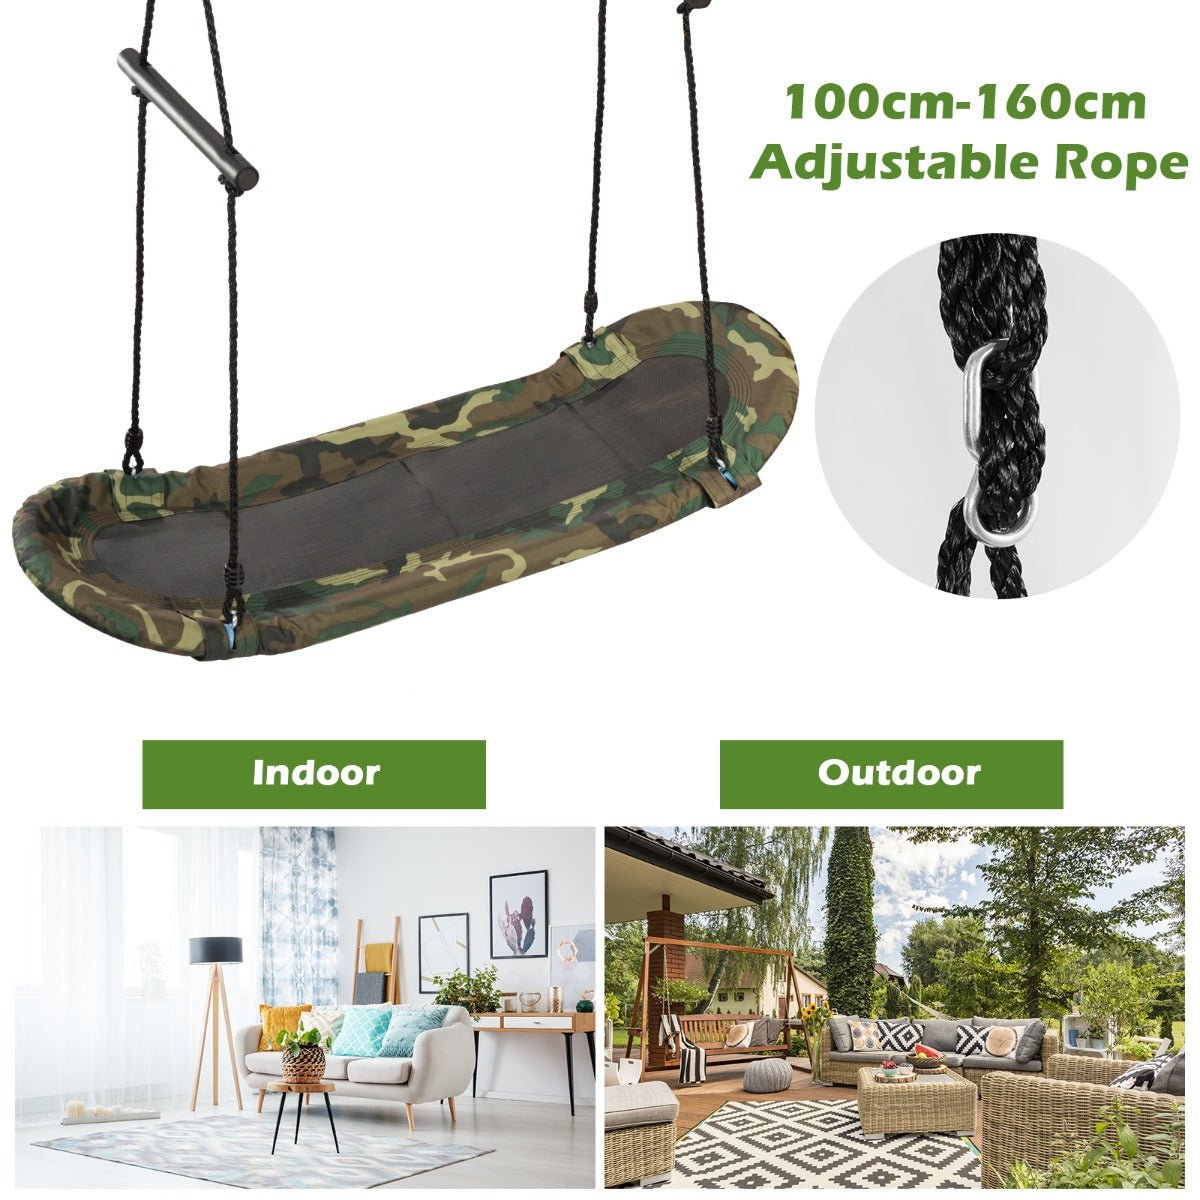 Adjustable Height Platform Swing: Soft Handles for Safe and Cozy Play